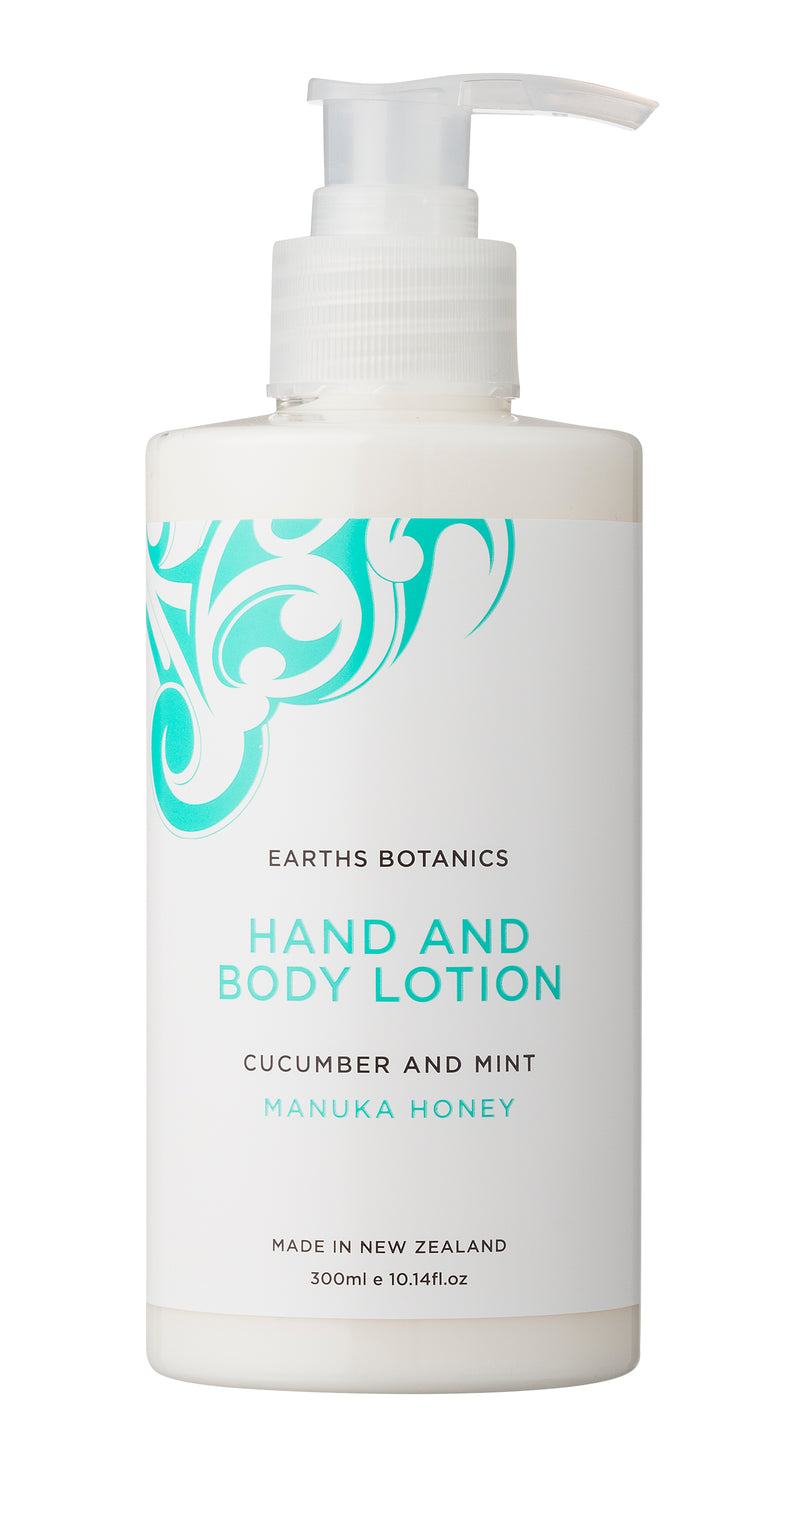 Cucumber and Mint Hand and Body Lotion